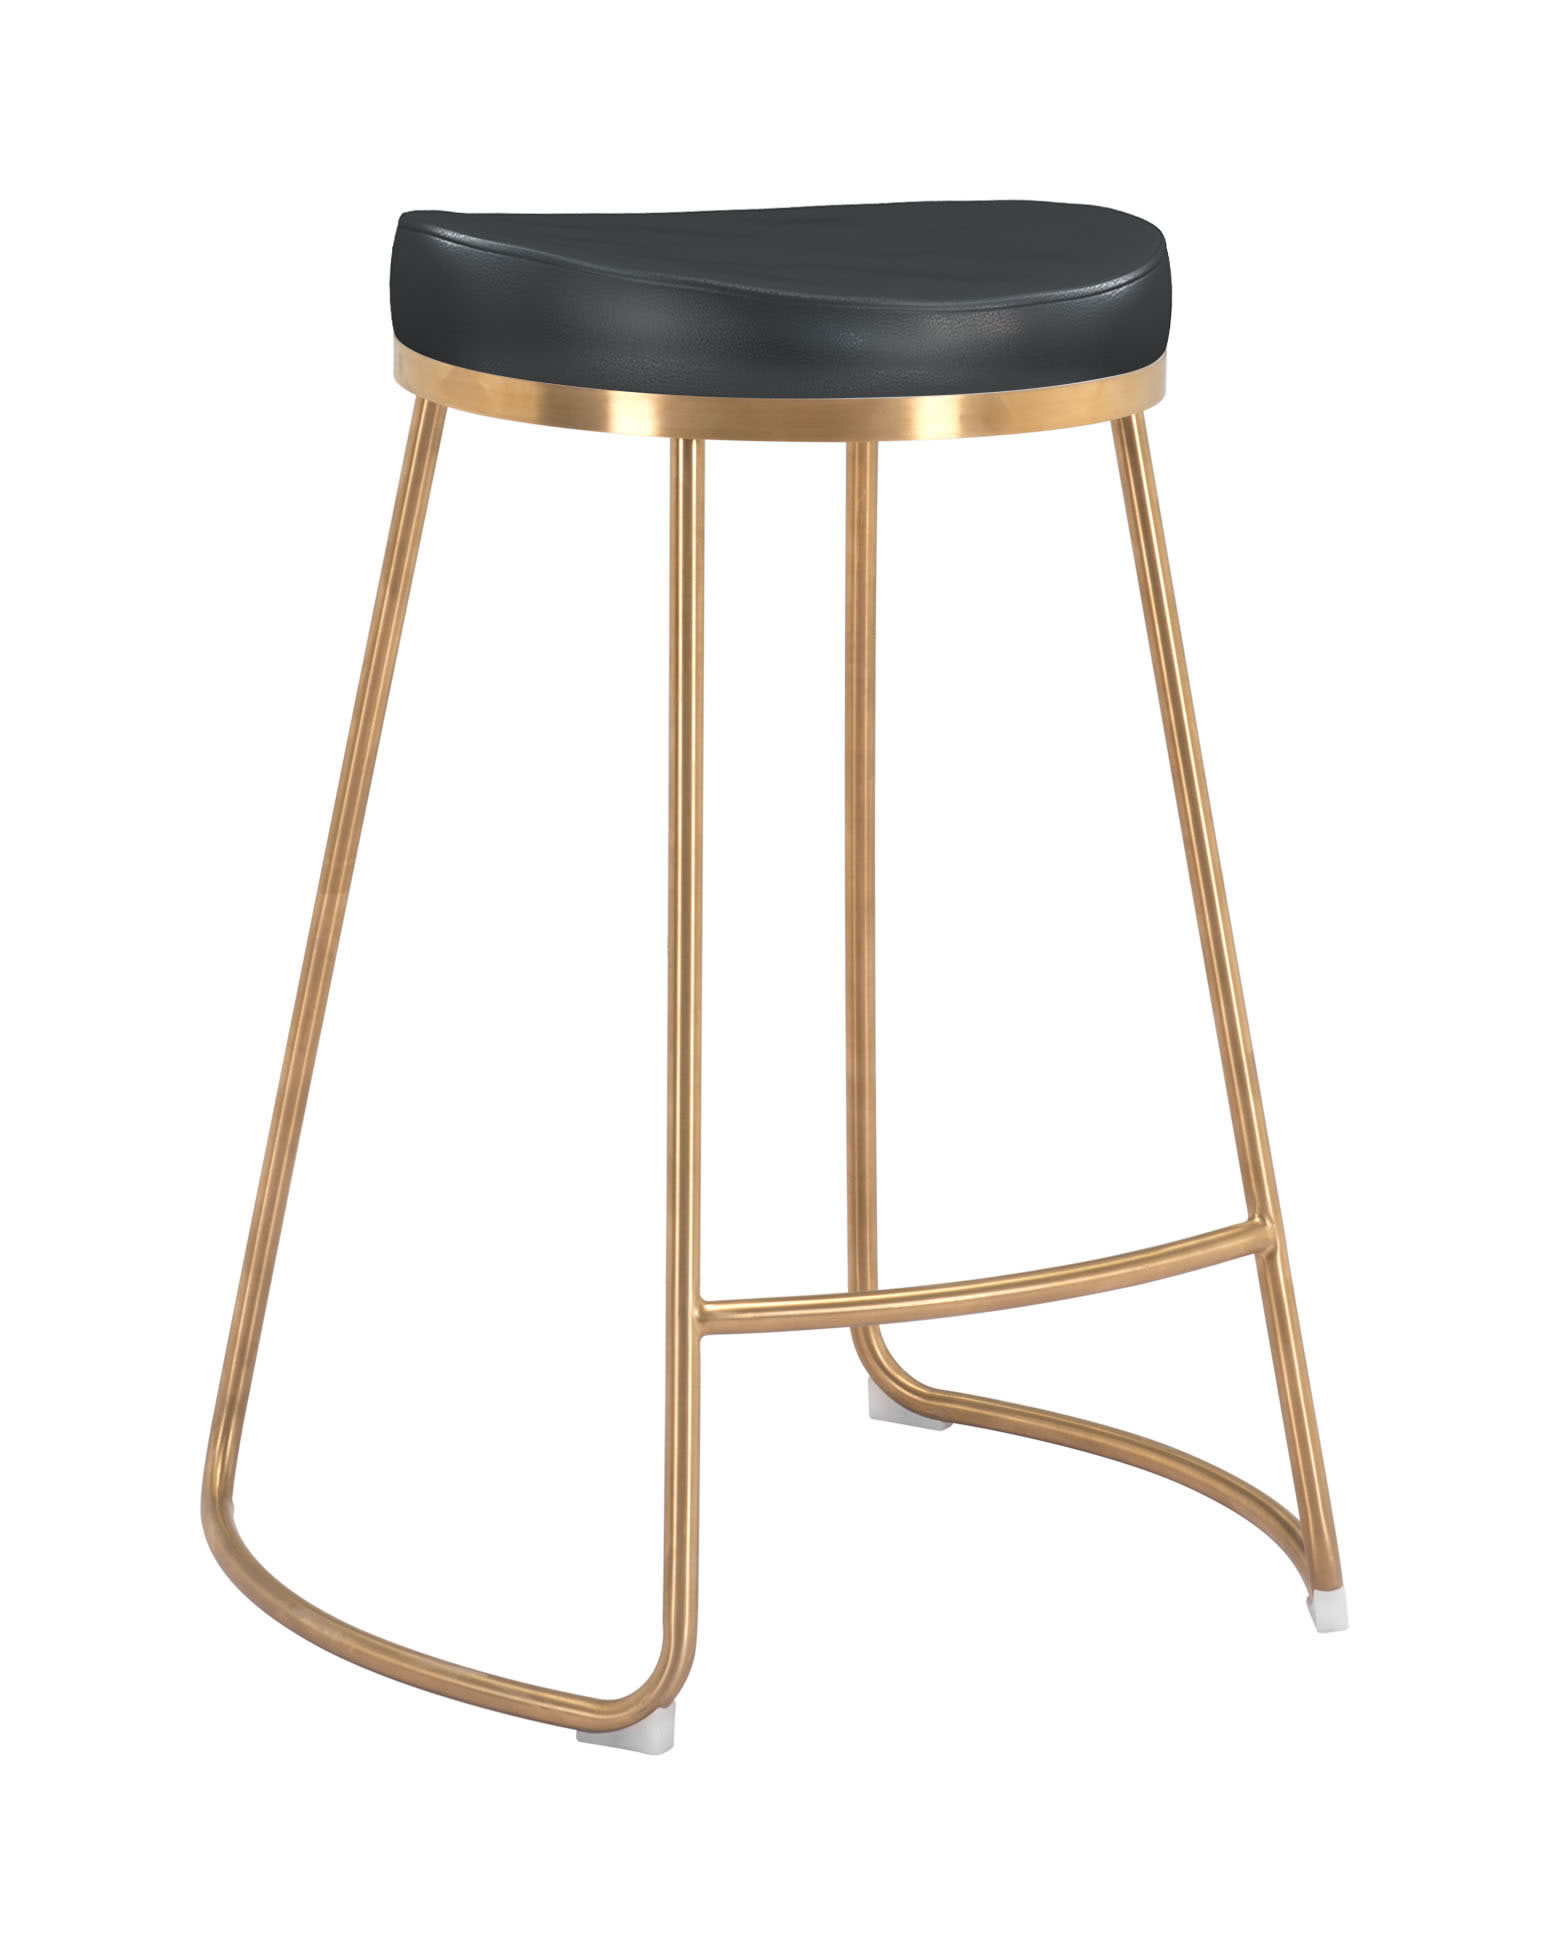 20.3" x 17.5" x 26.2" Black, Leatherette, Stainless Steel, Counter Stool - Set of 2